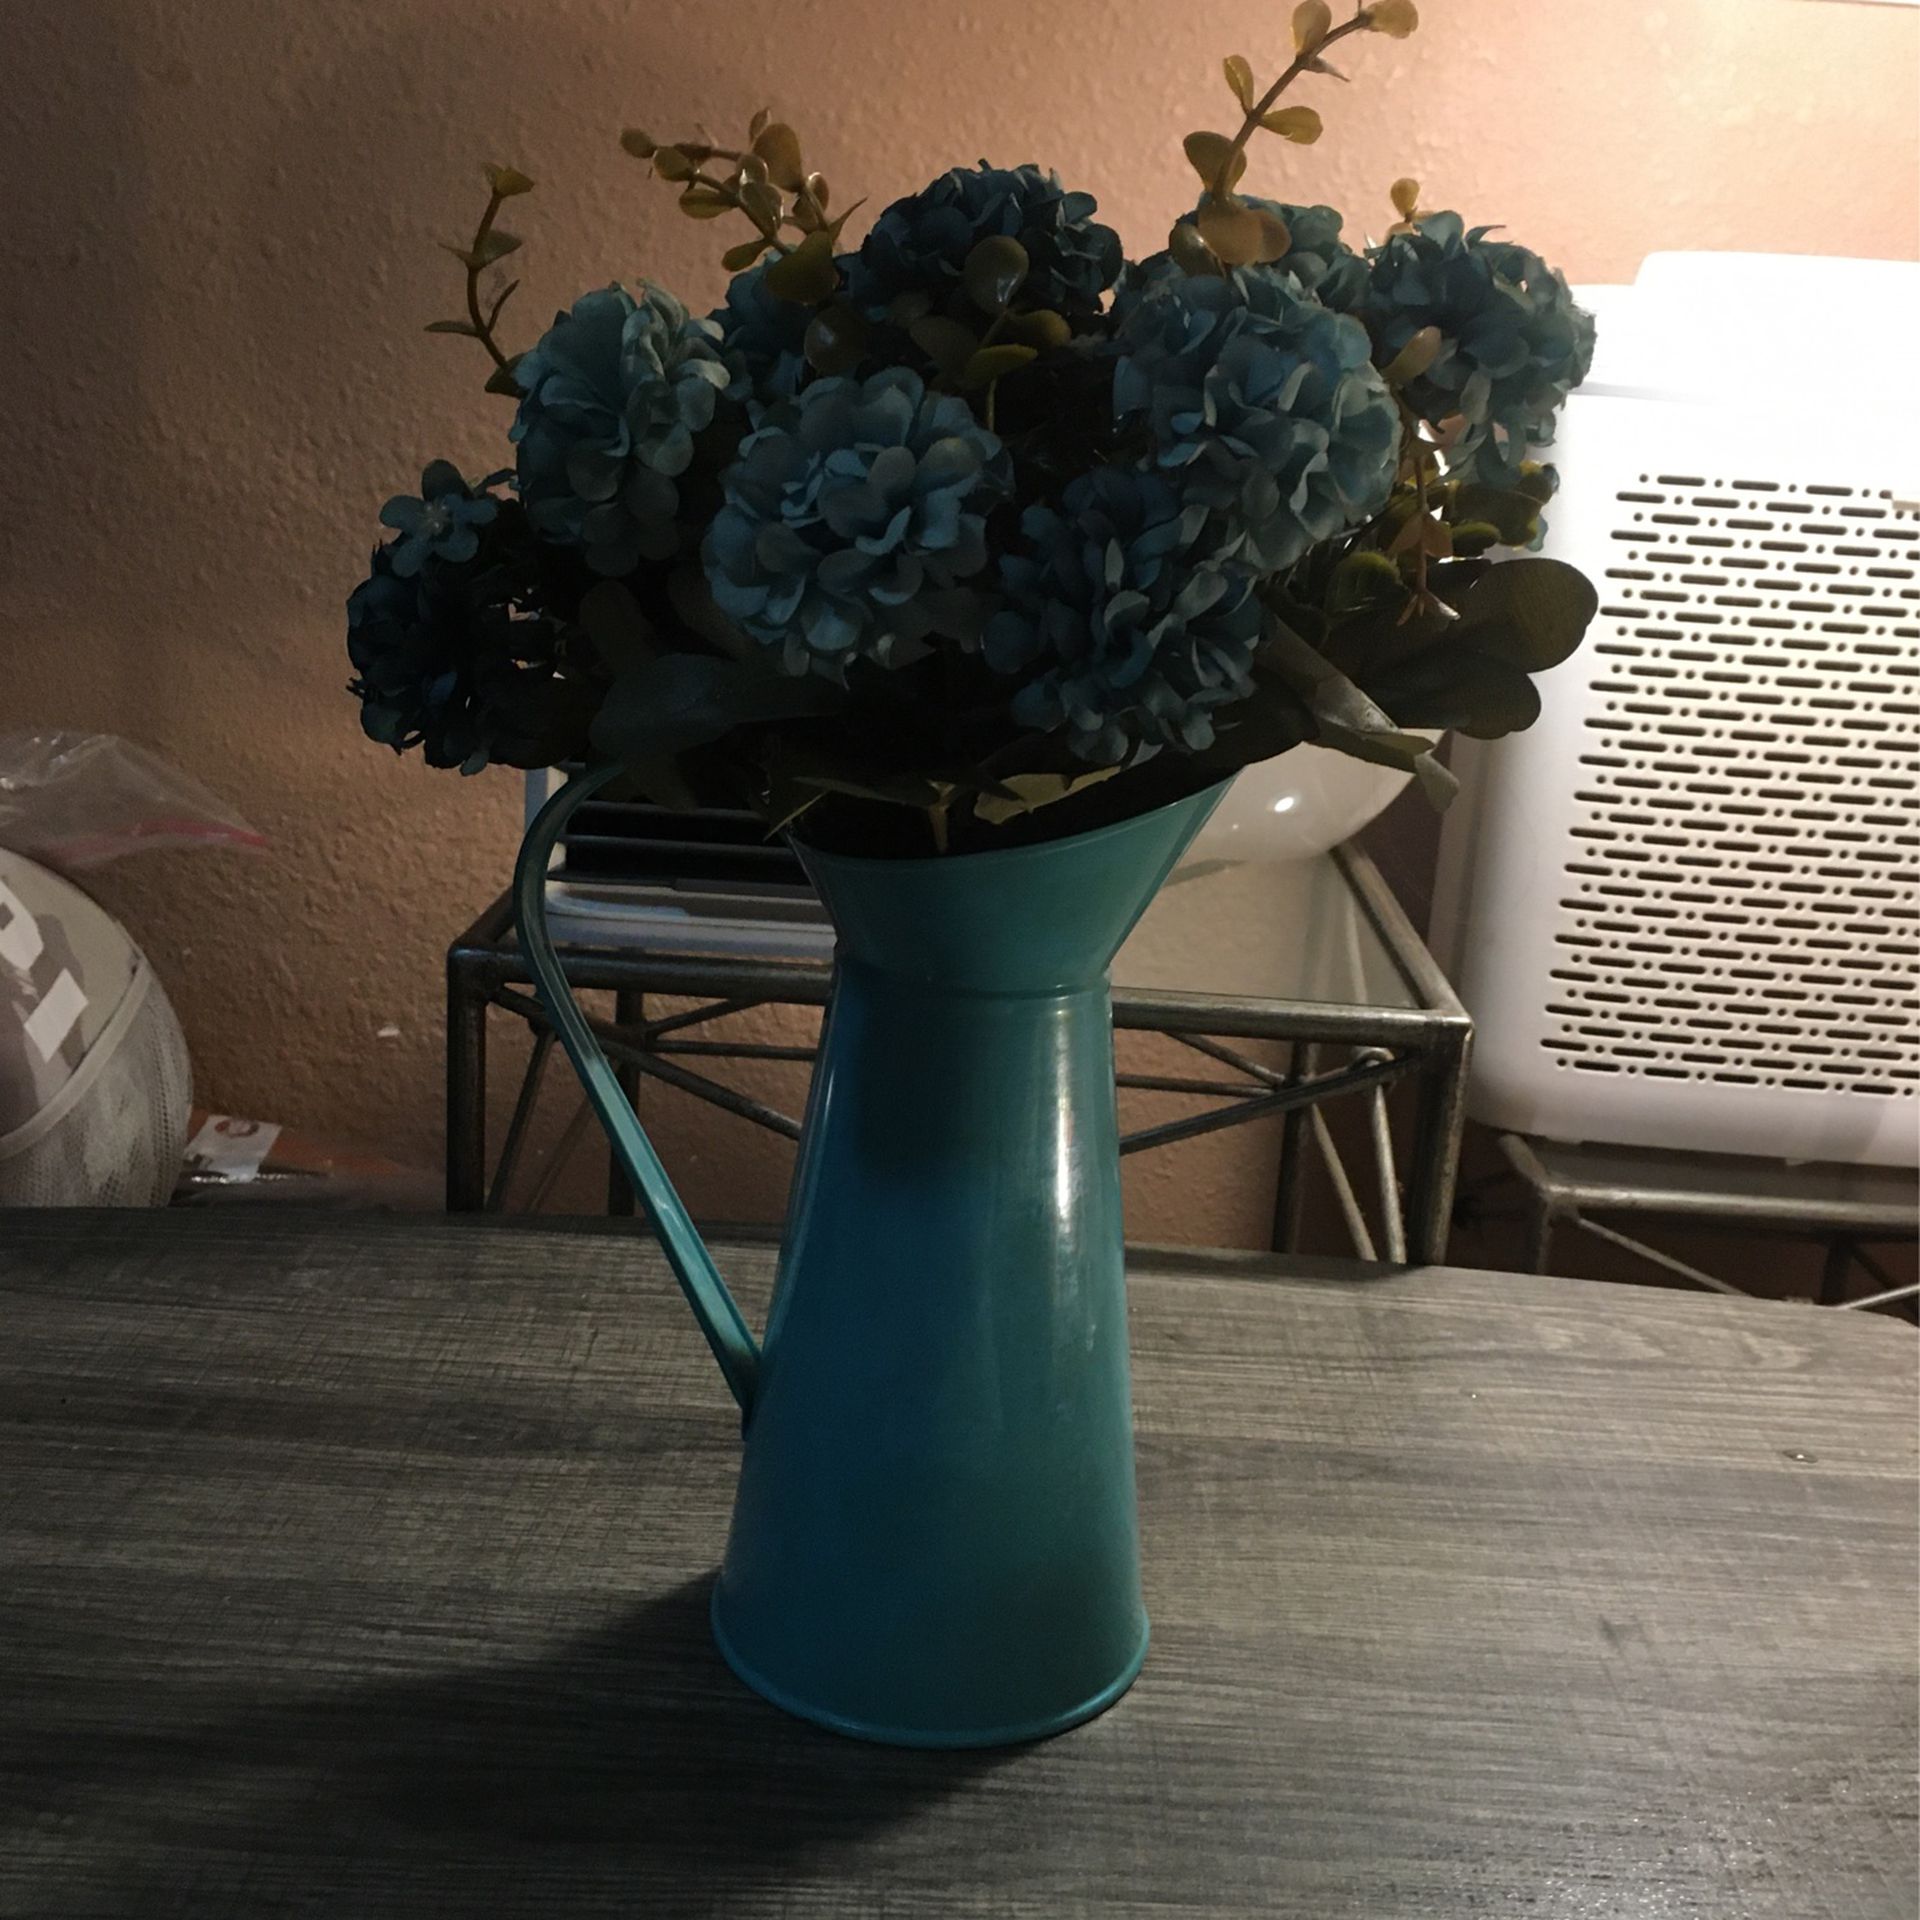 Beautiful Plastic Flowers With Pitcher Vase Excellent Condition $10 C My Deals Tyl